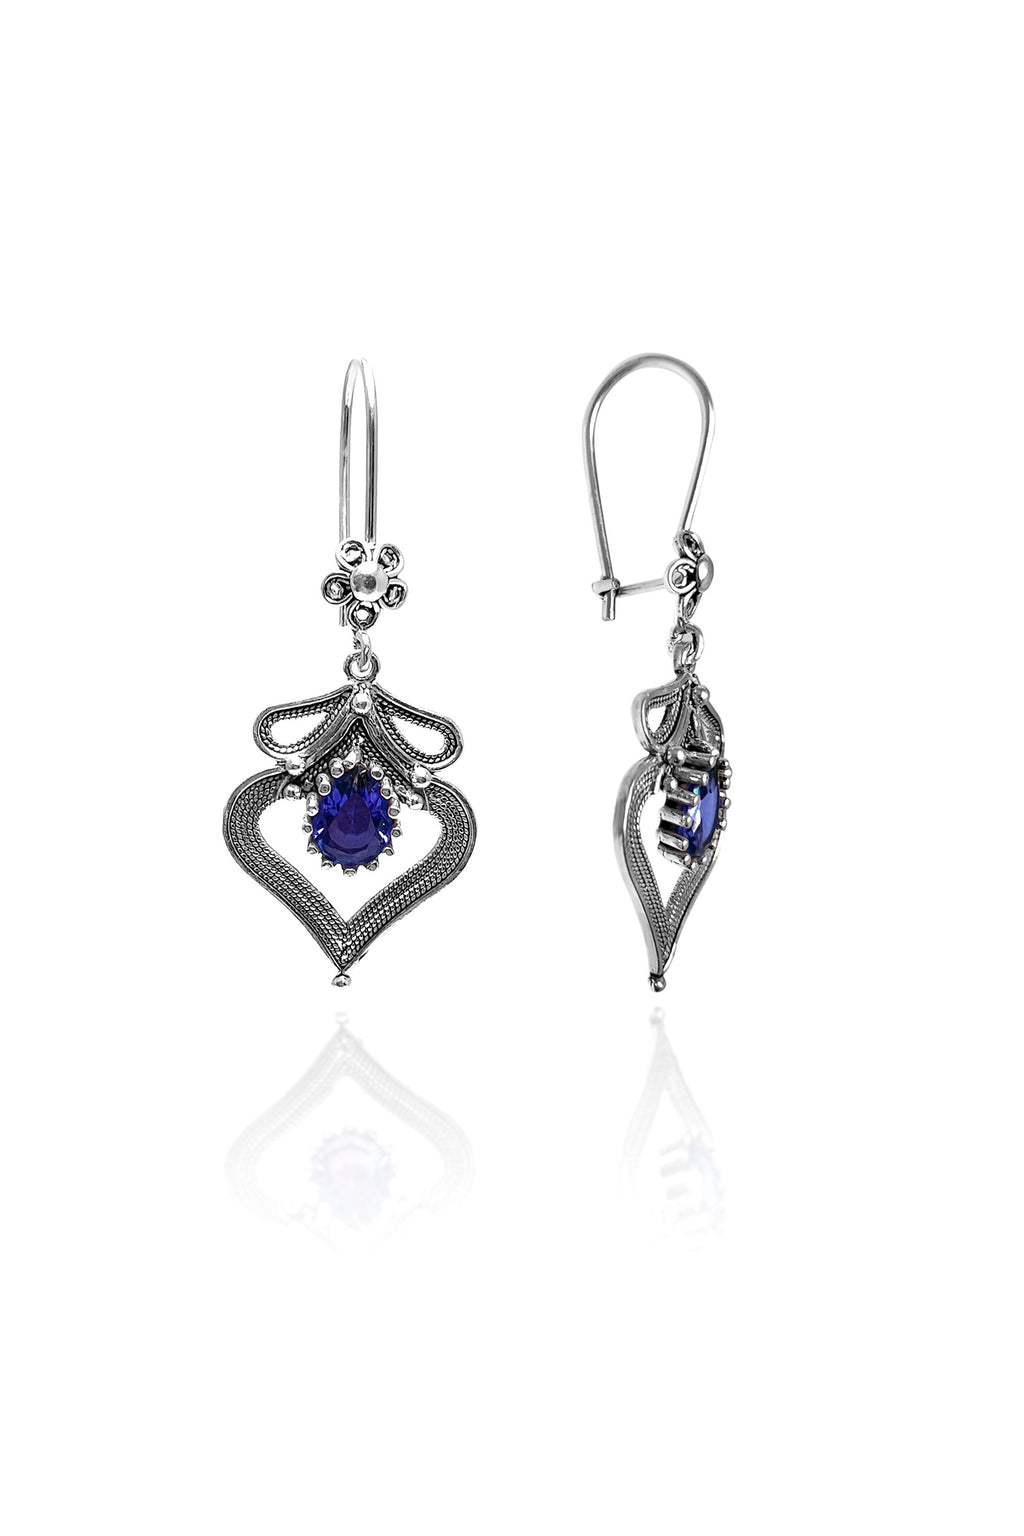 Heart Model Filigree Handmade Silver Earrings With Sapphire (NG201019168)